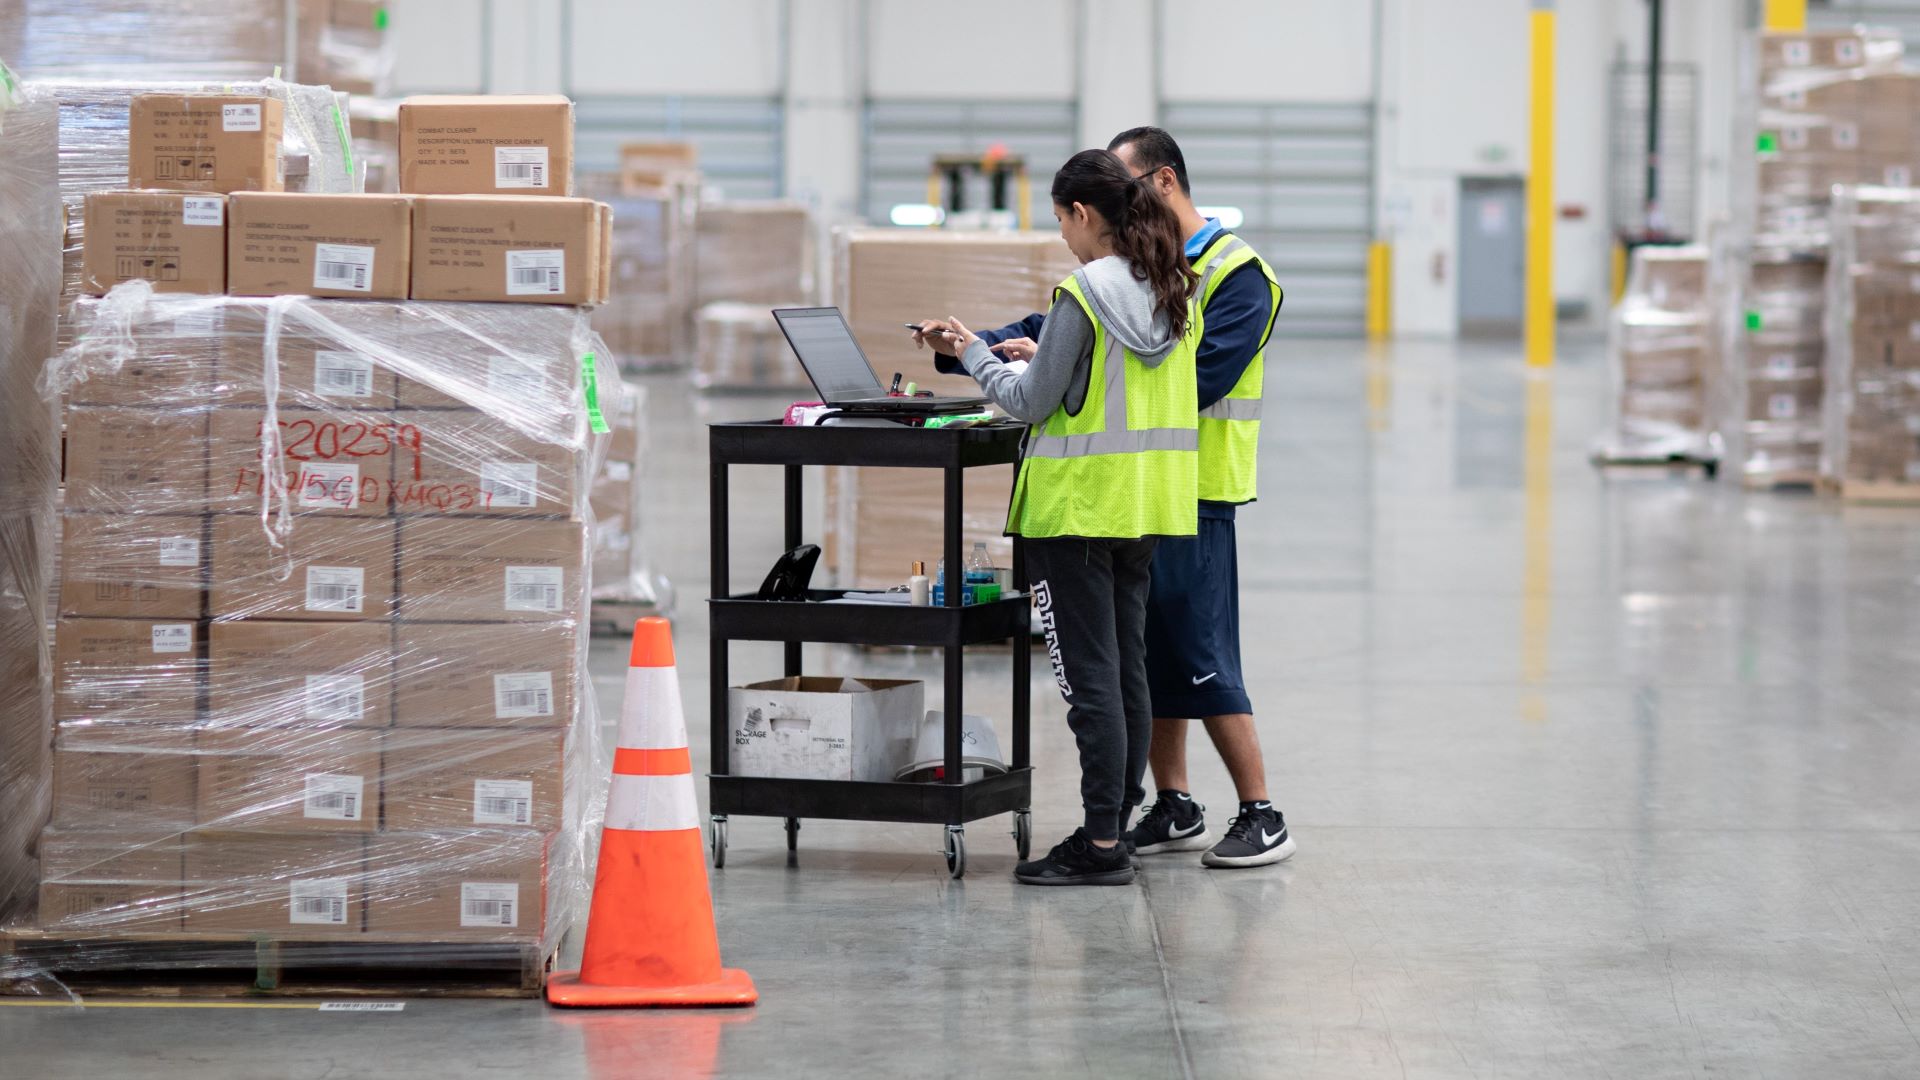 Workers with yellow vests checking inventory information in a warehouse with boxes stacked up on foor.